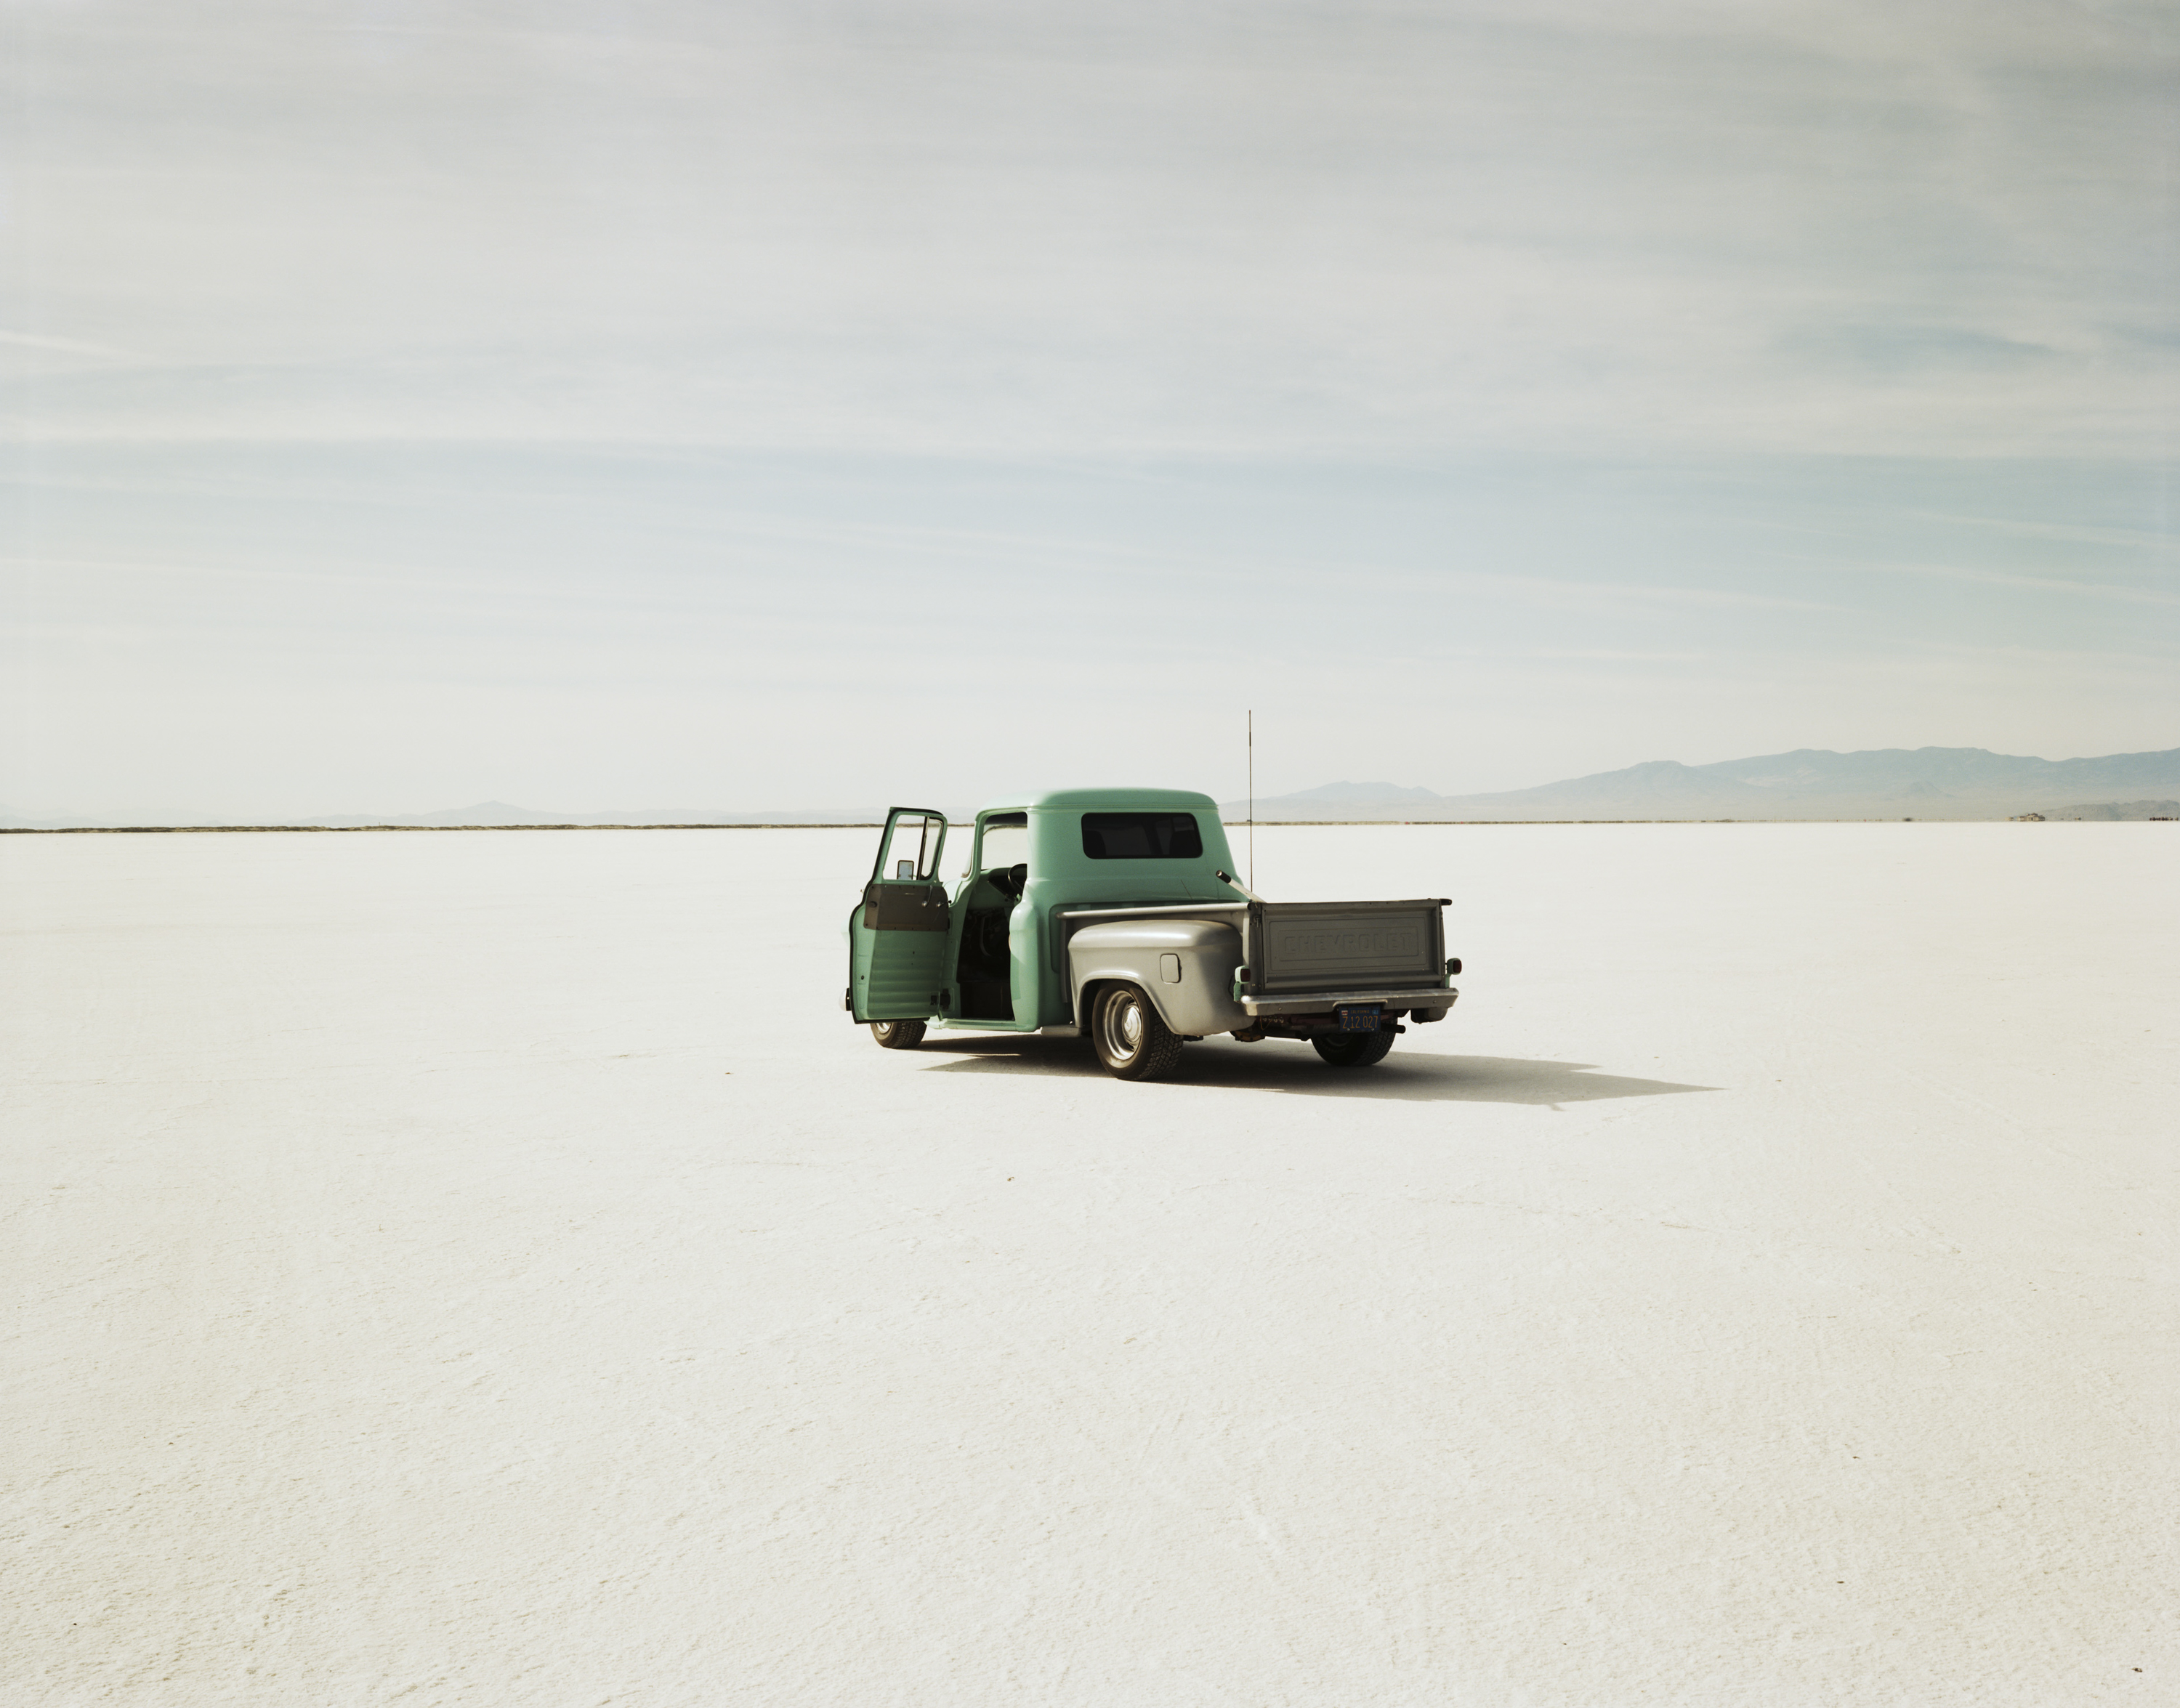 Color photograph of a pickup truck in the middle of empty salt flats with mountains along the horizon